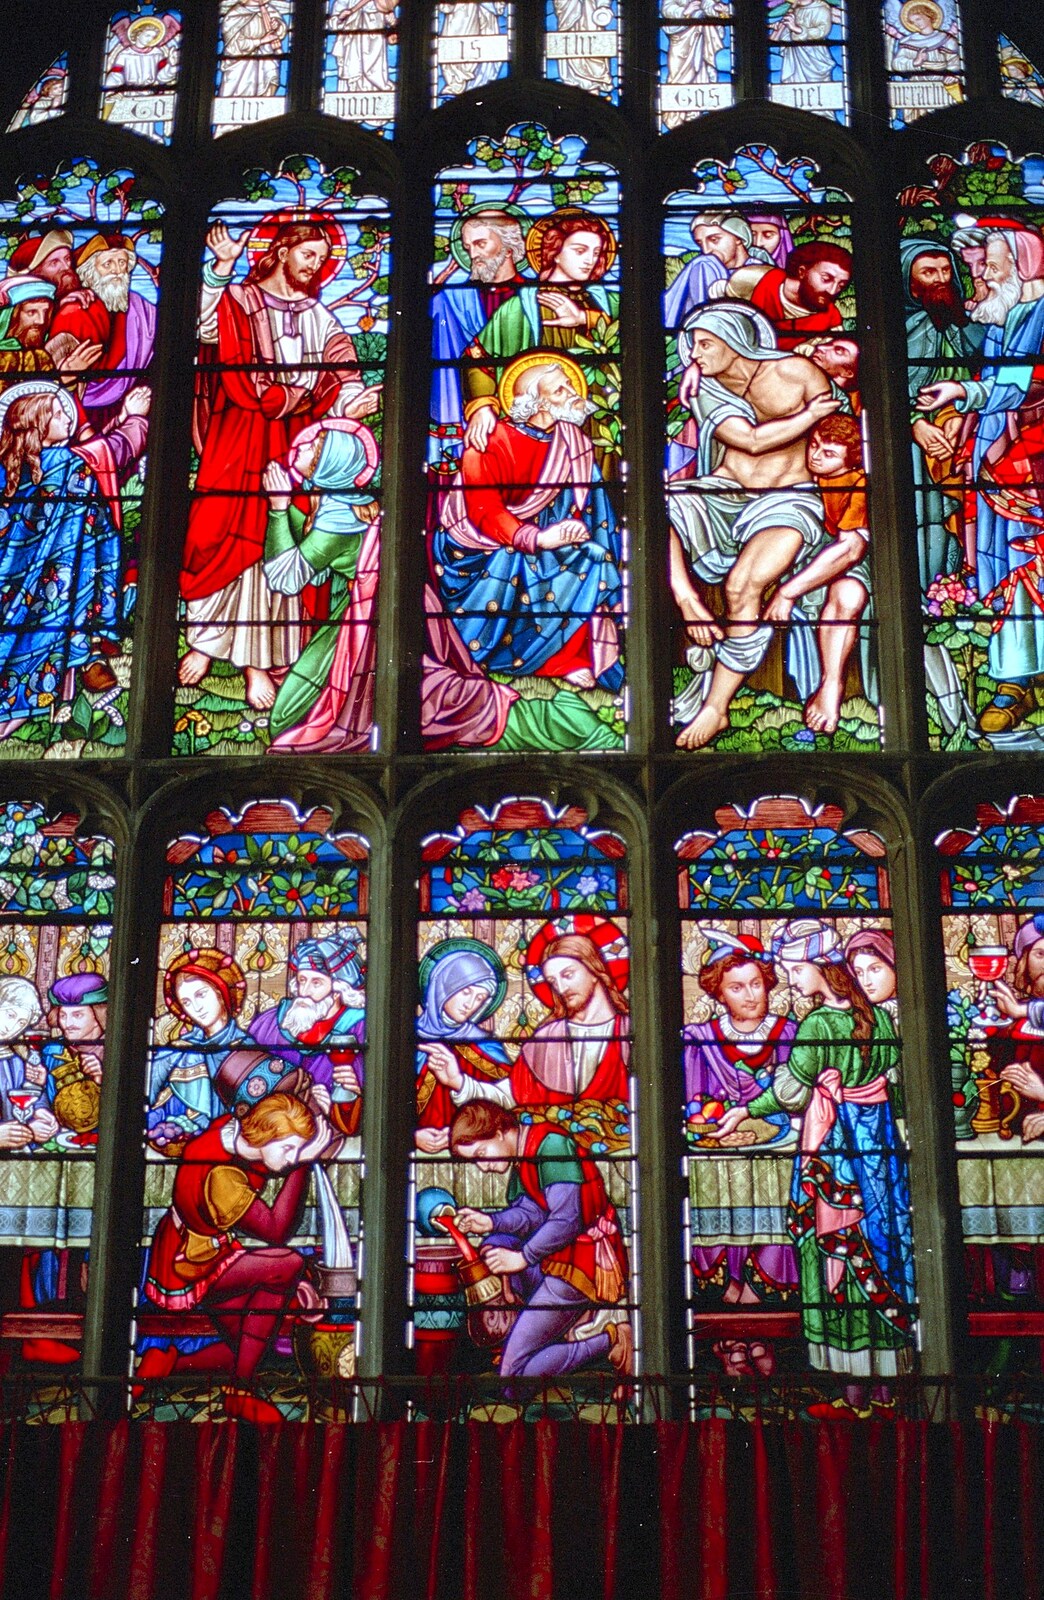 Stunning stained glass from Mother and Mike Visit, Lavenham, Suffolk - 14th April 1996